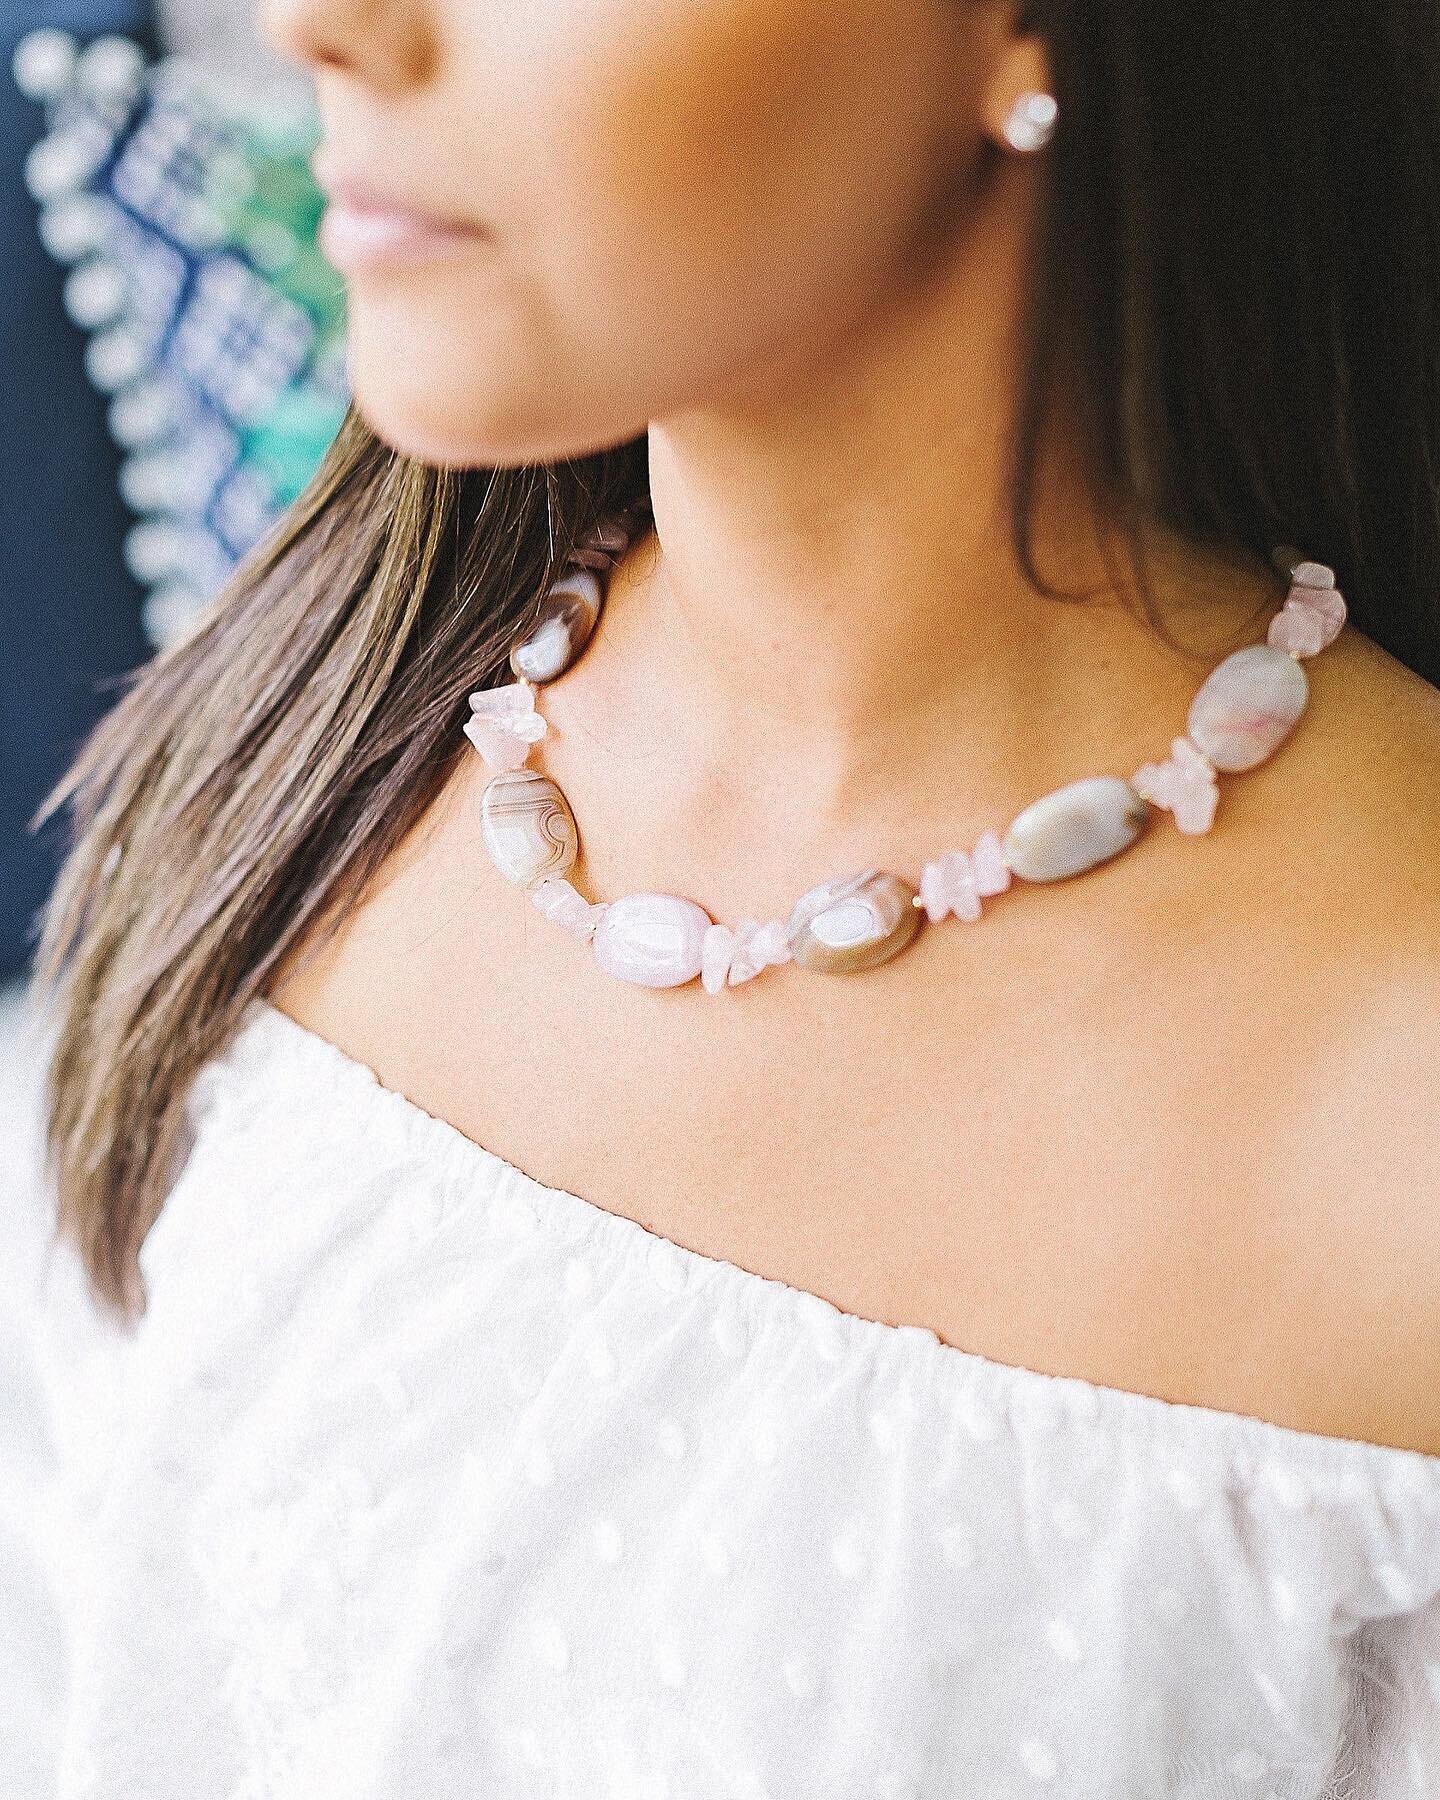 The &ldquo;Isn&rsquo;t She Lovely&rdquo; necklace is named for the high quality Rose Quartz stones used to fill the entire necklace. Itty bitty hematite sprinkles make an appearance for a sweet, sophisticated touch. This necklace is perfect for a bri